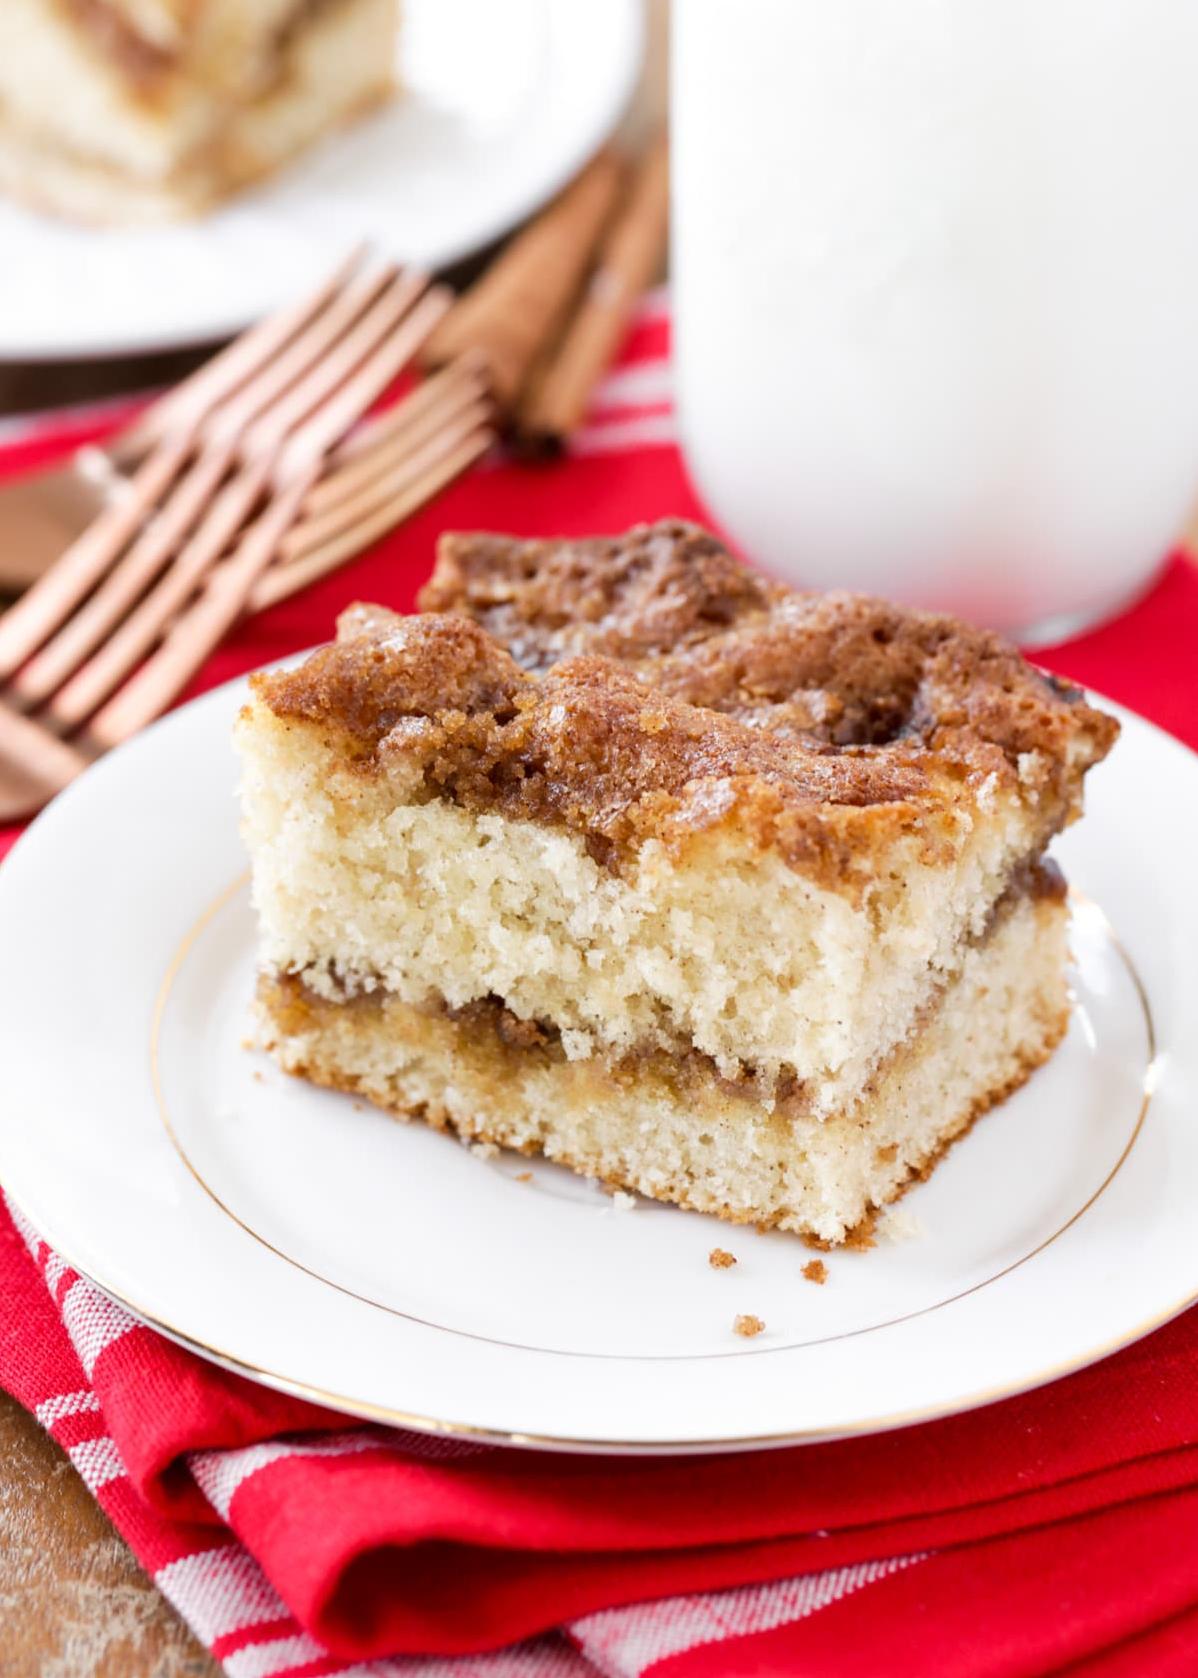  Take a bite of this moist and flavorful coffee cake.